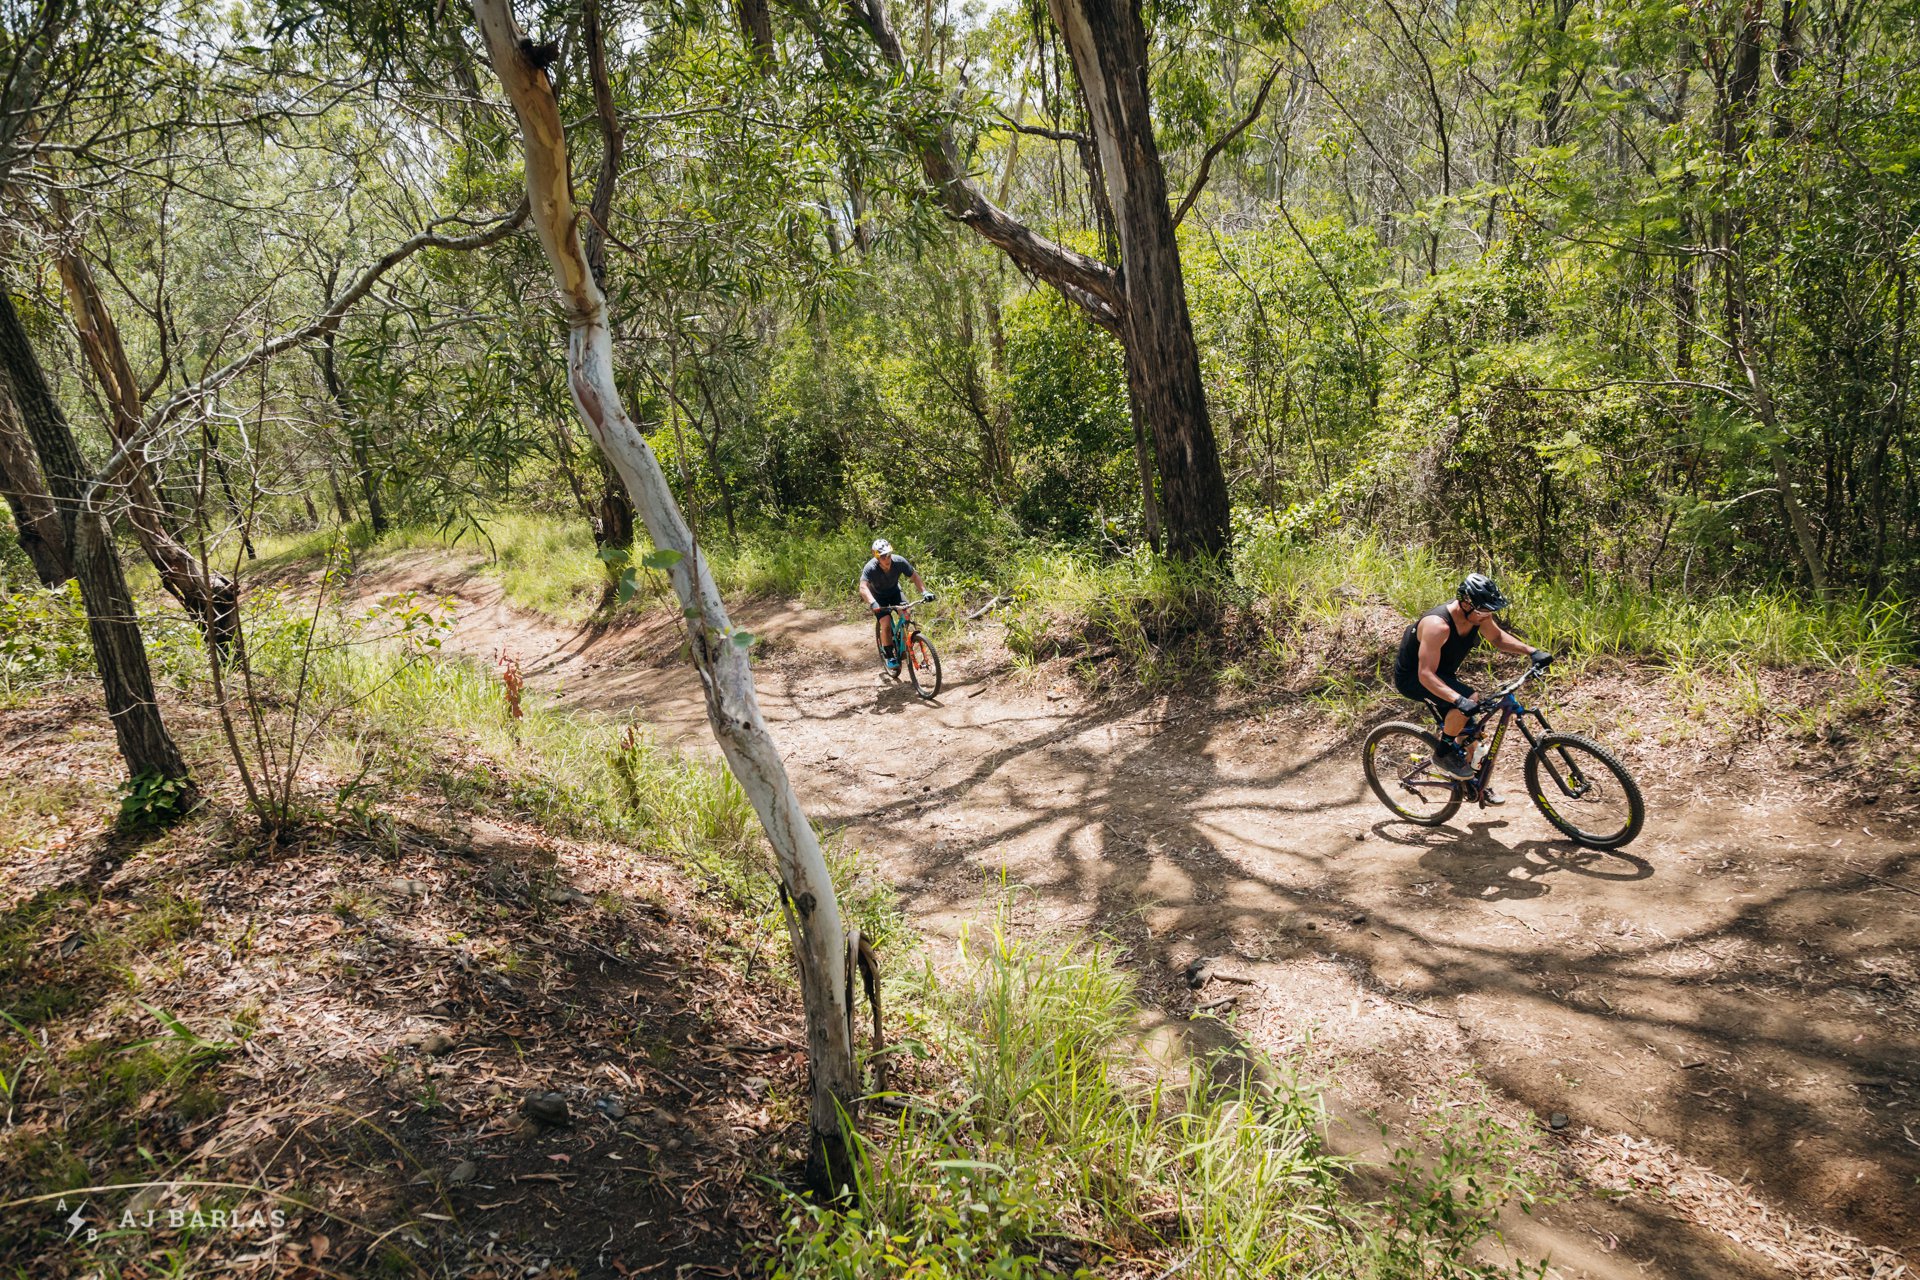 Graves and Rude climbing up for more in Toowoomba